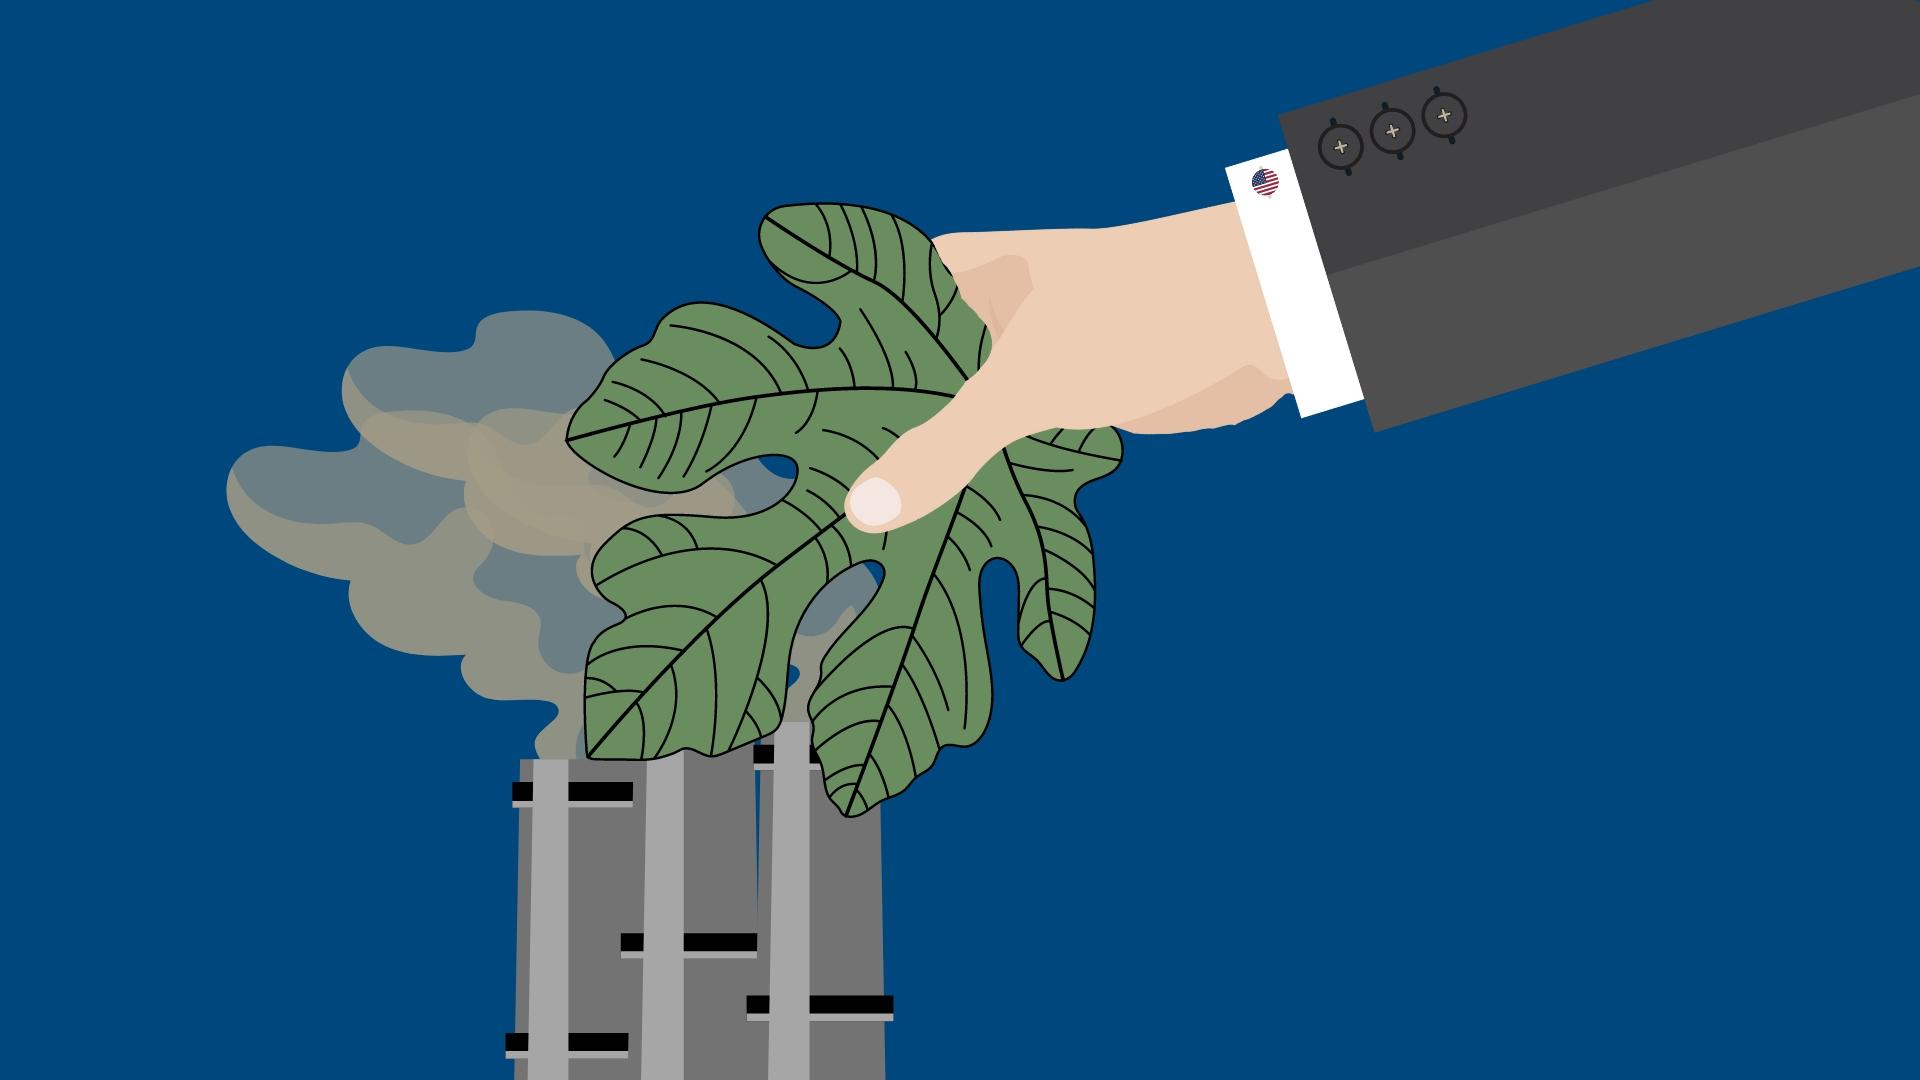 A hand with an American flag cuff link holds a fig leaf over the pollution from a smokestack